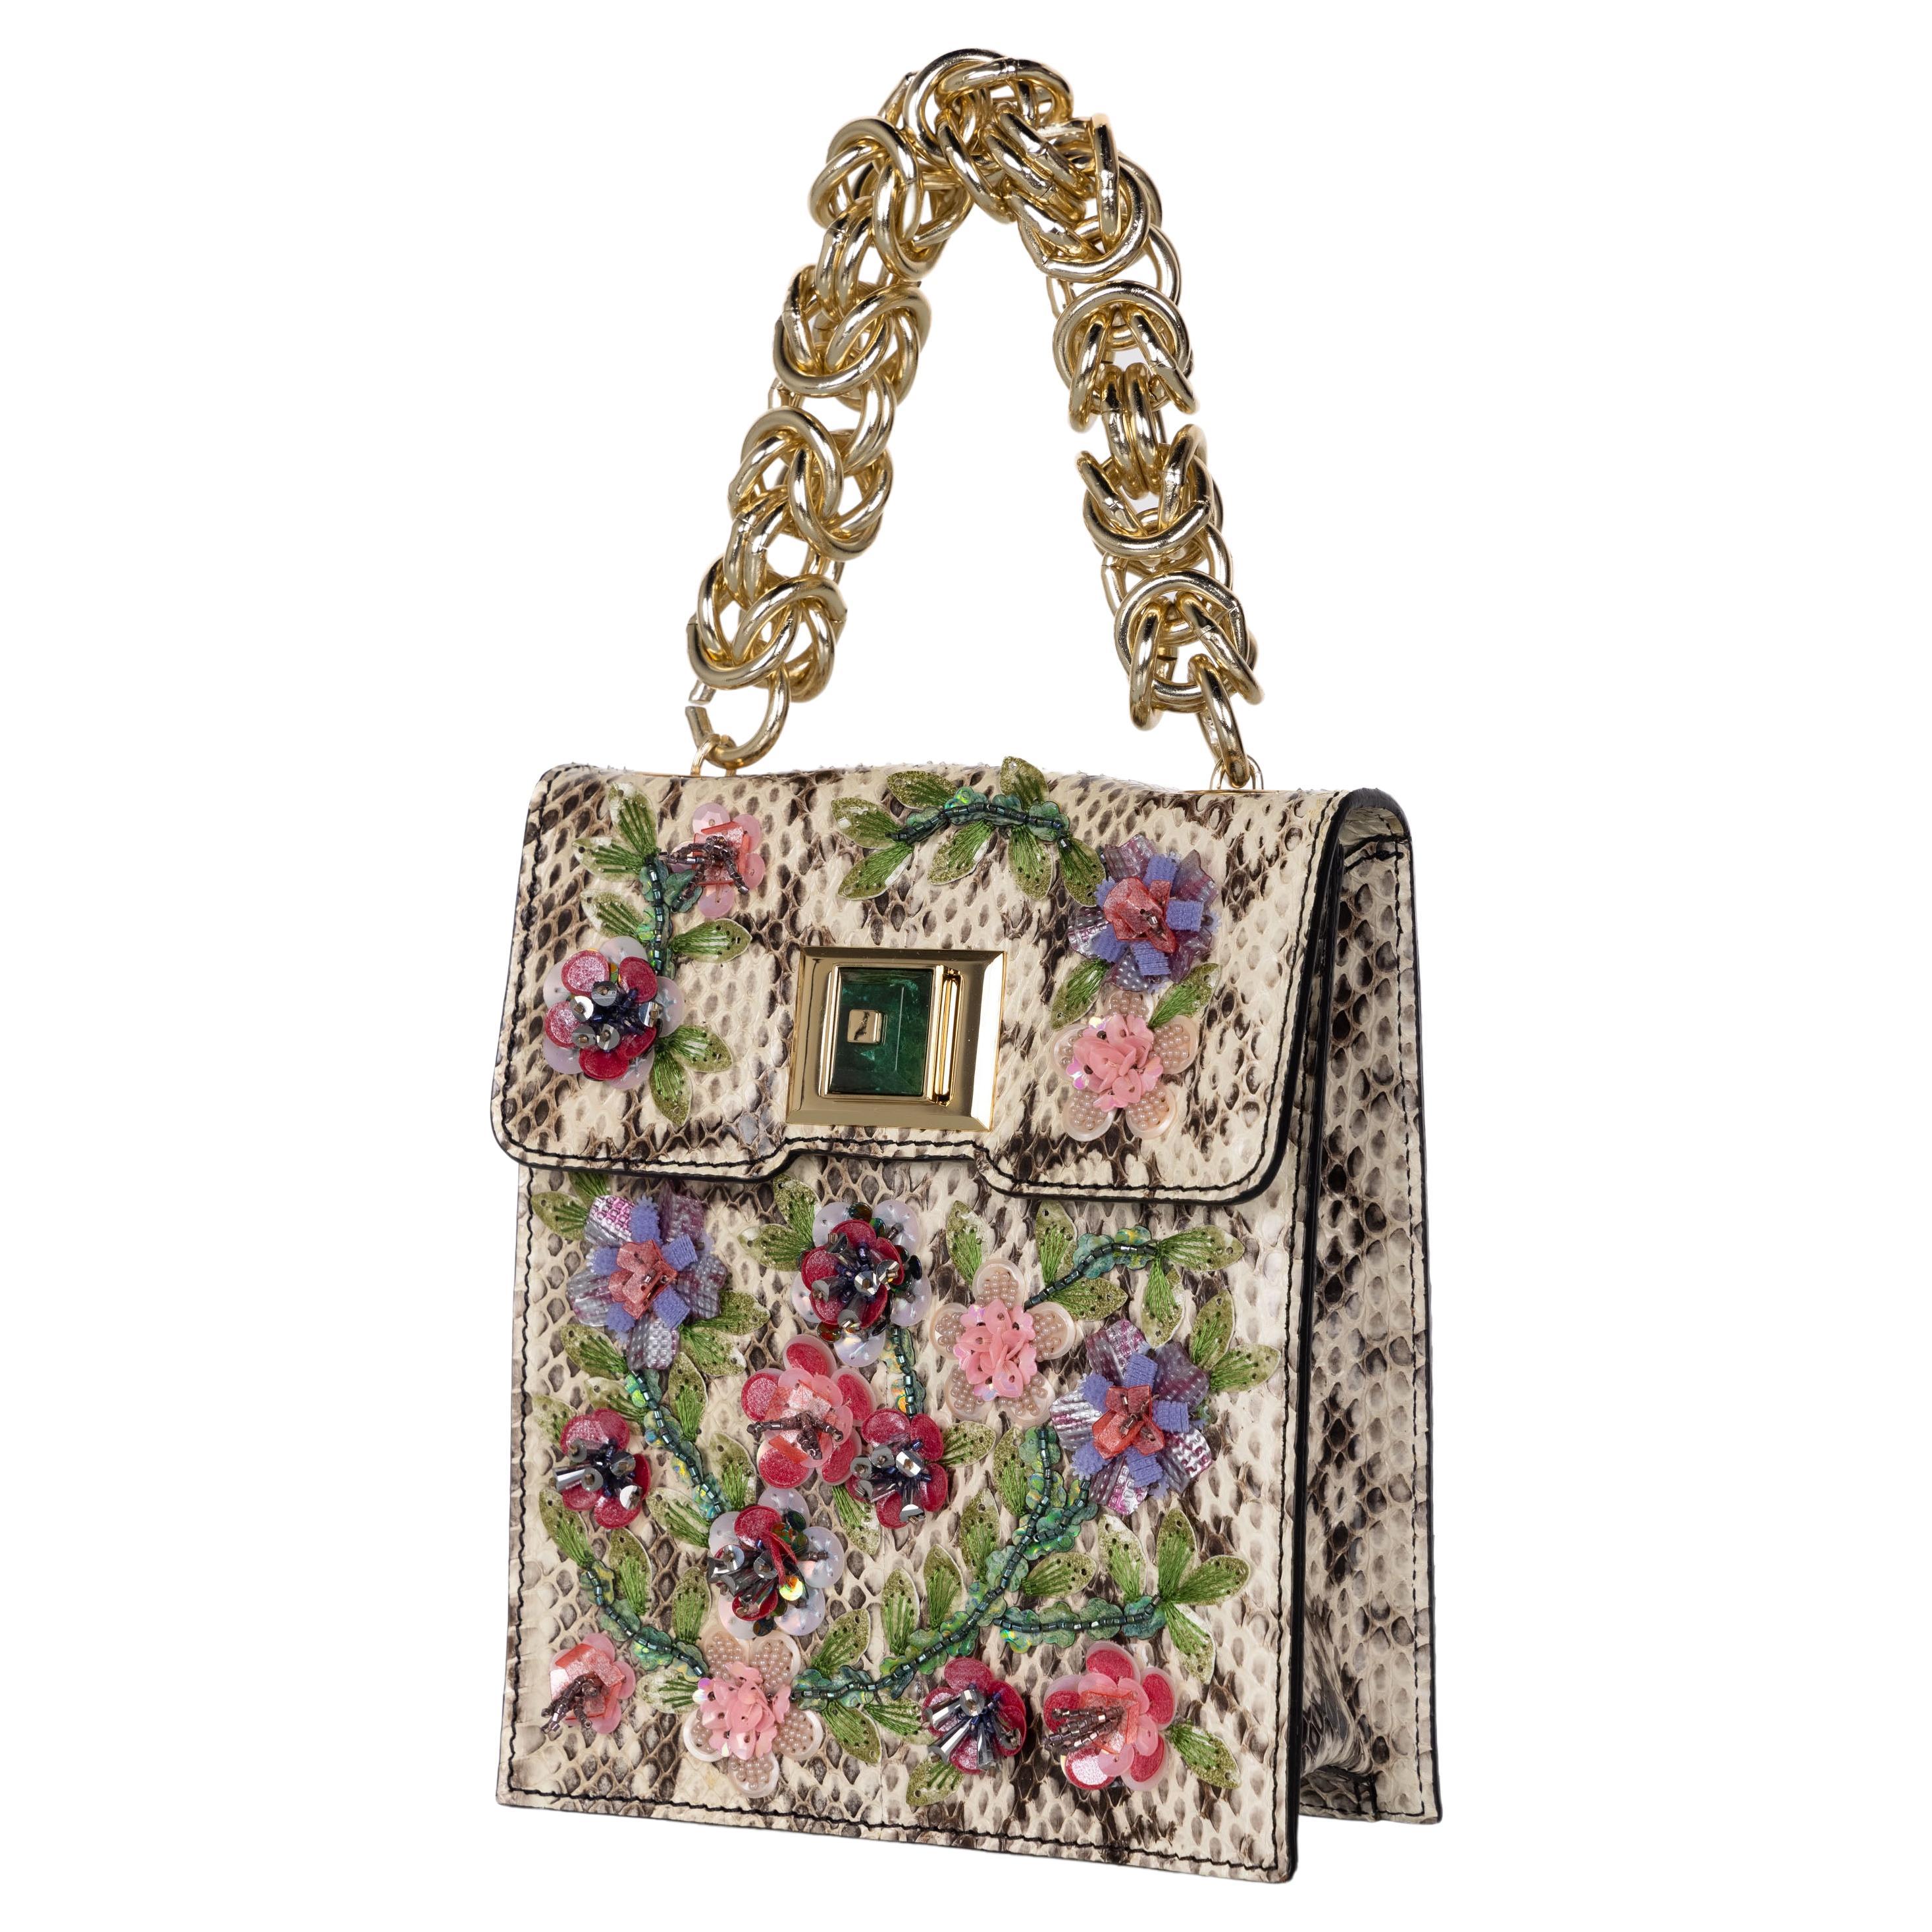 Andrew Gn Embellish Floral Chain Top Handle Bag New Tags